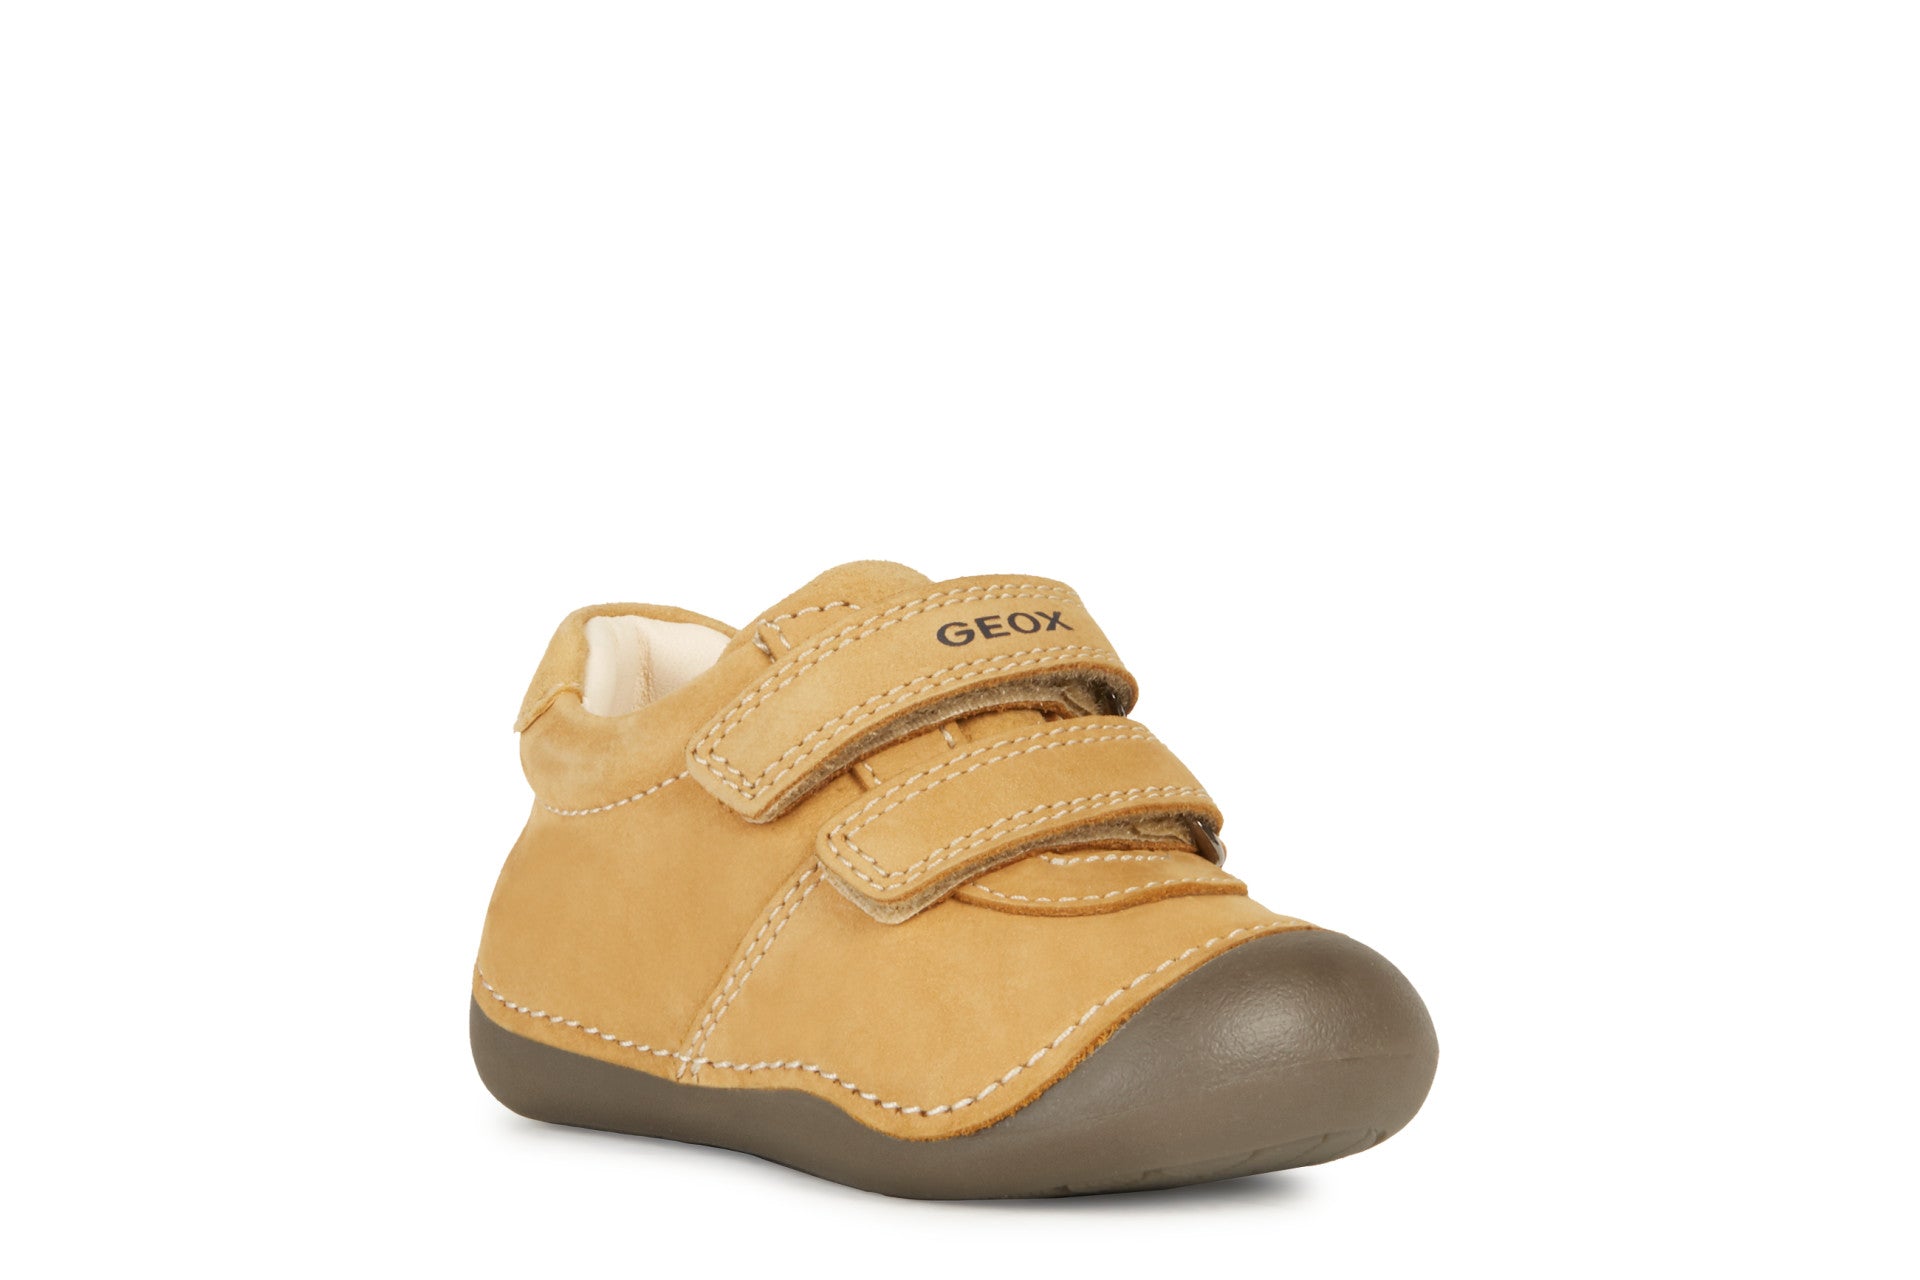 Boys pre walkers by Geox, style B Tutim, in light tan nubuck leather with double velcro fastening. Angled view right side.